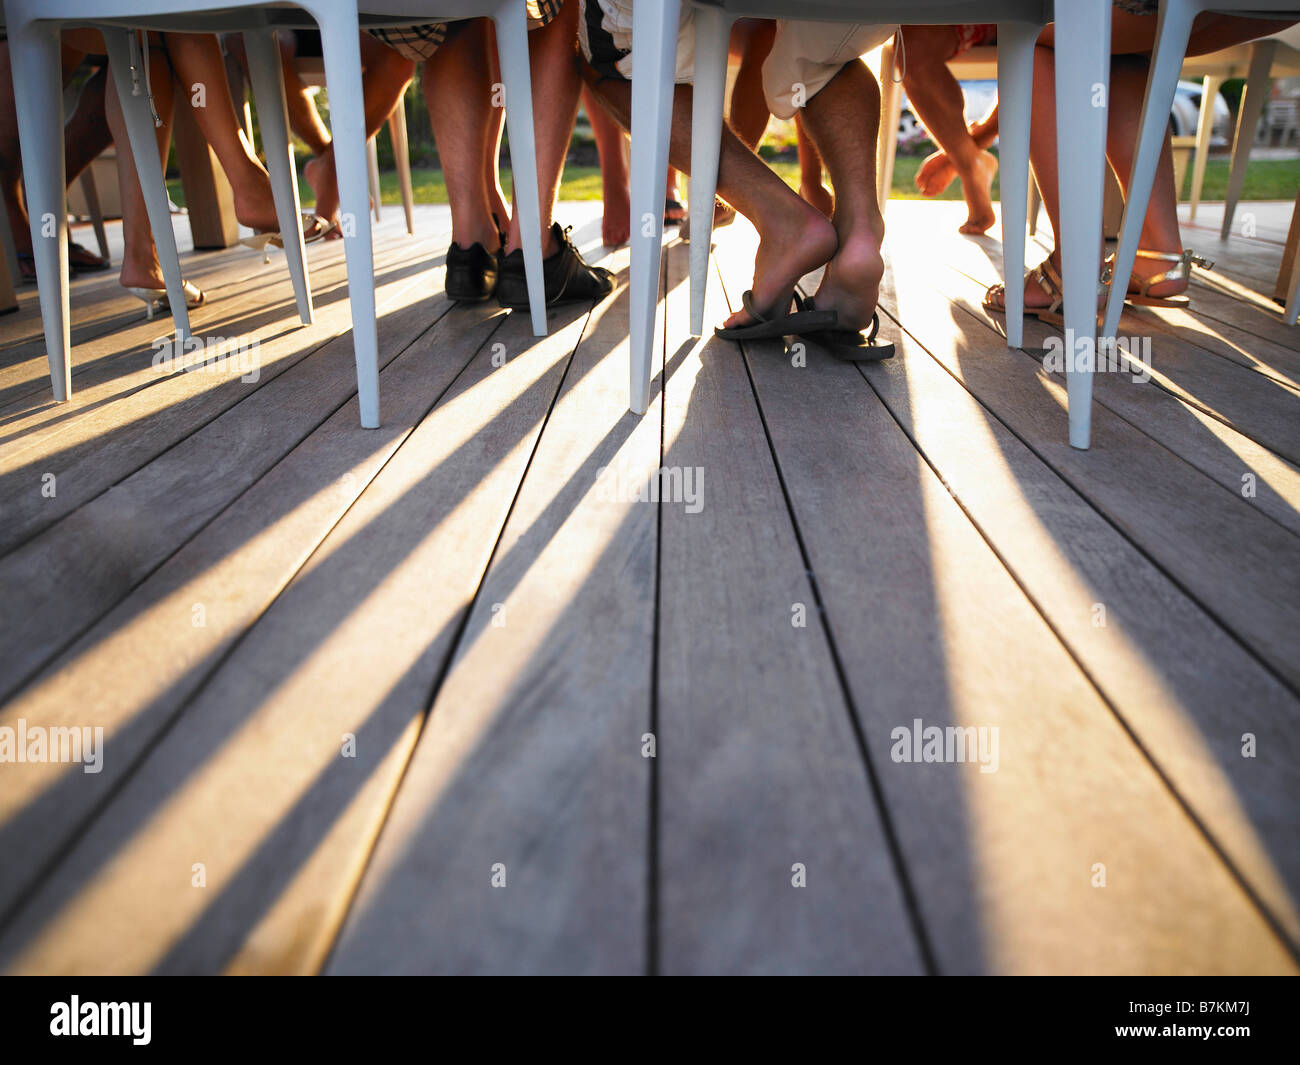 Many legs under table casting shadows Stock Photo